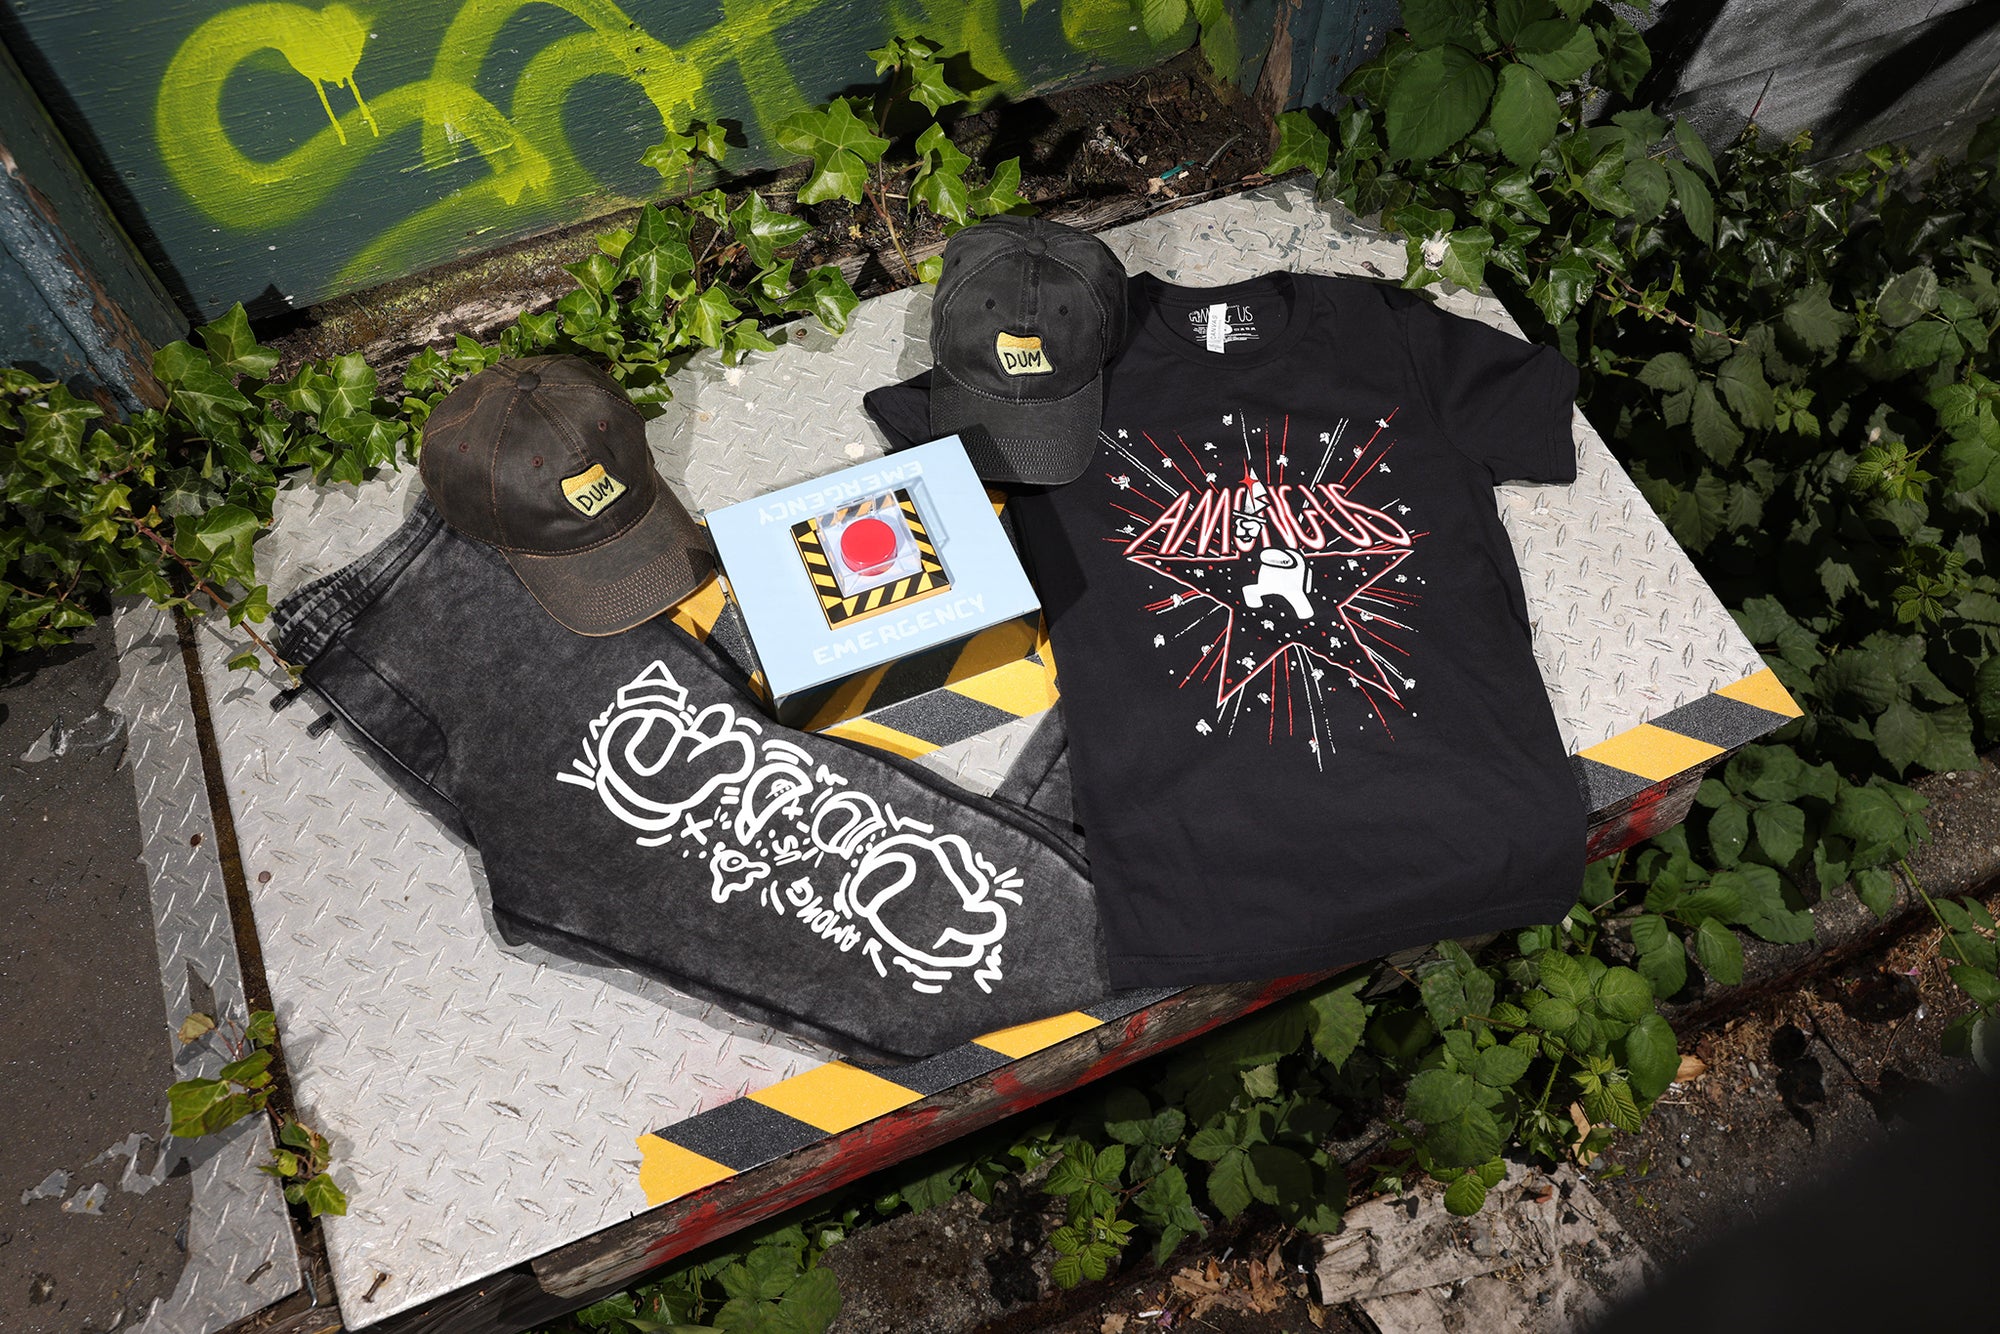 Photograph showcasing some of the Among Us: 5th Anniversary Collection, including printed tee, cap, joggers, and the collector’s edition of the game.